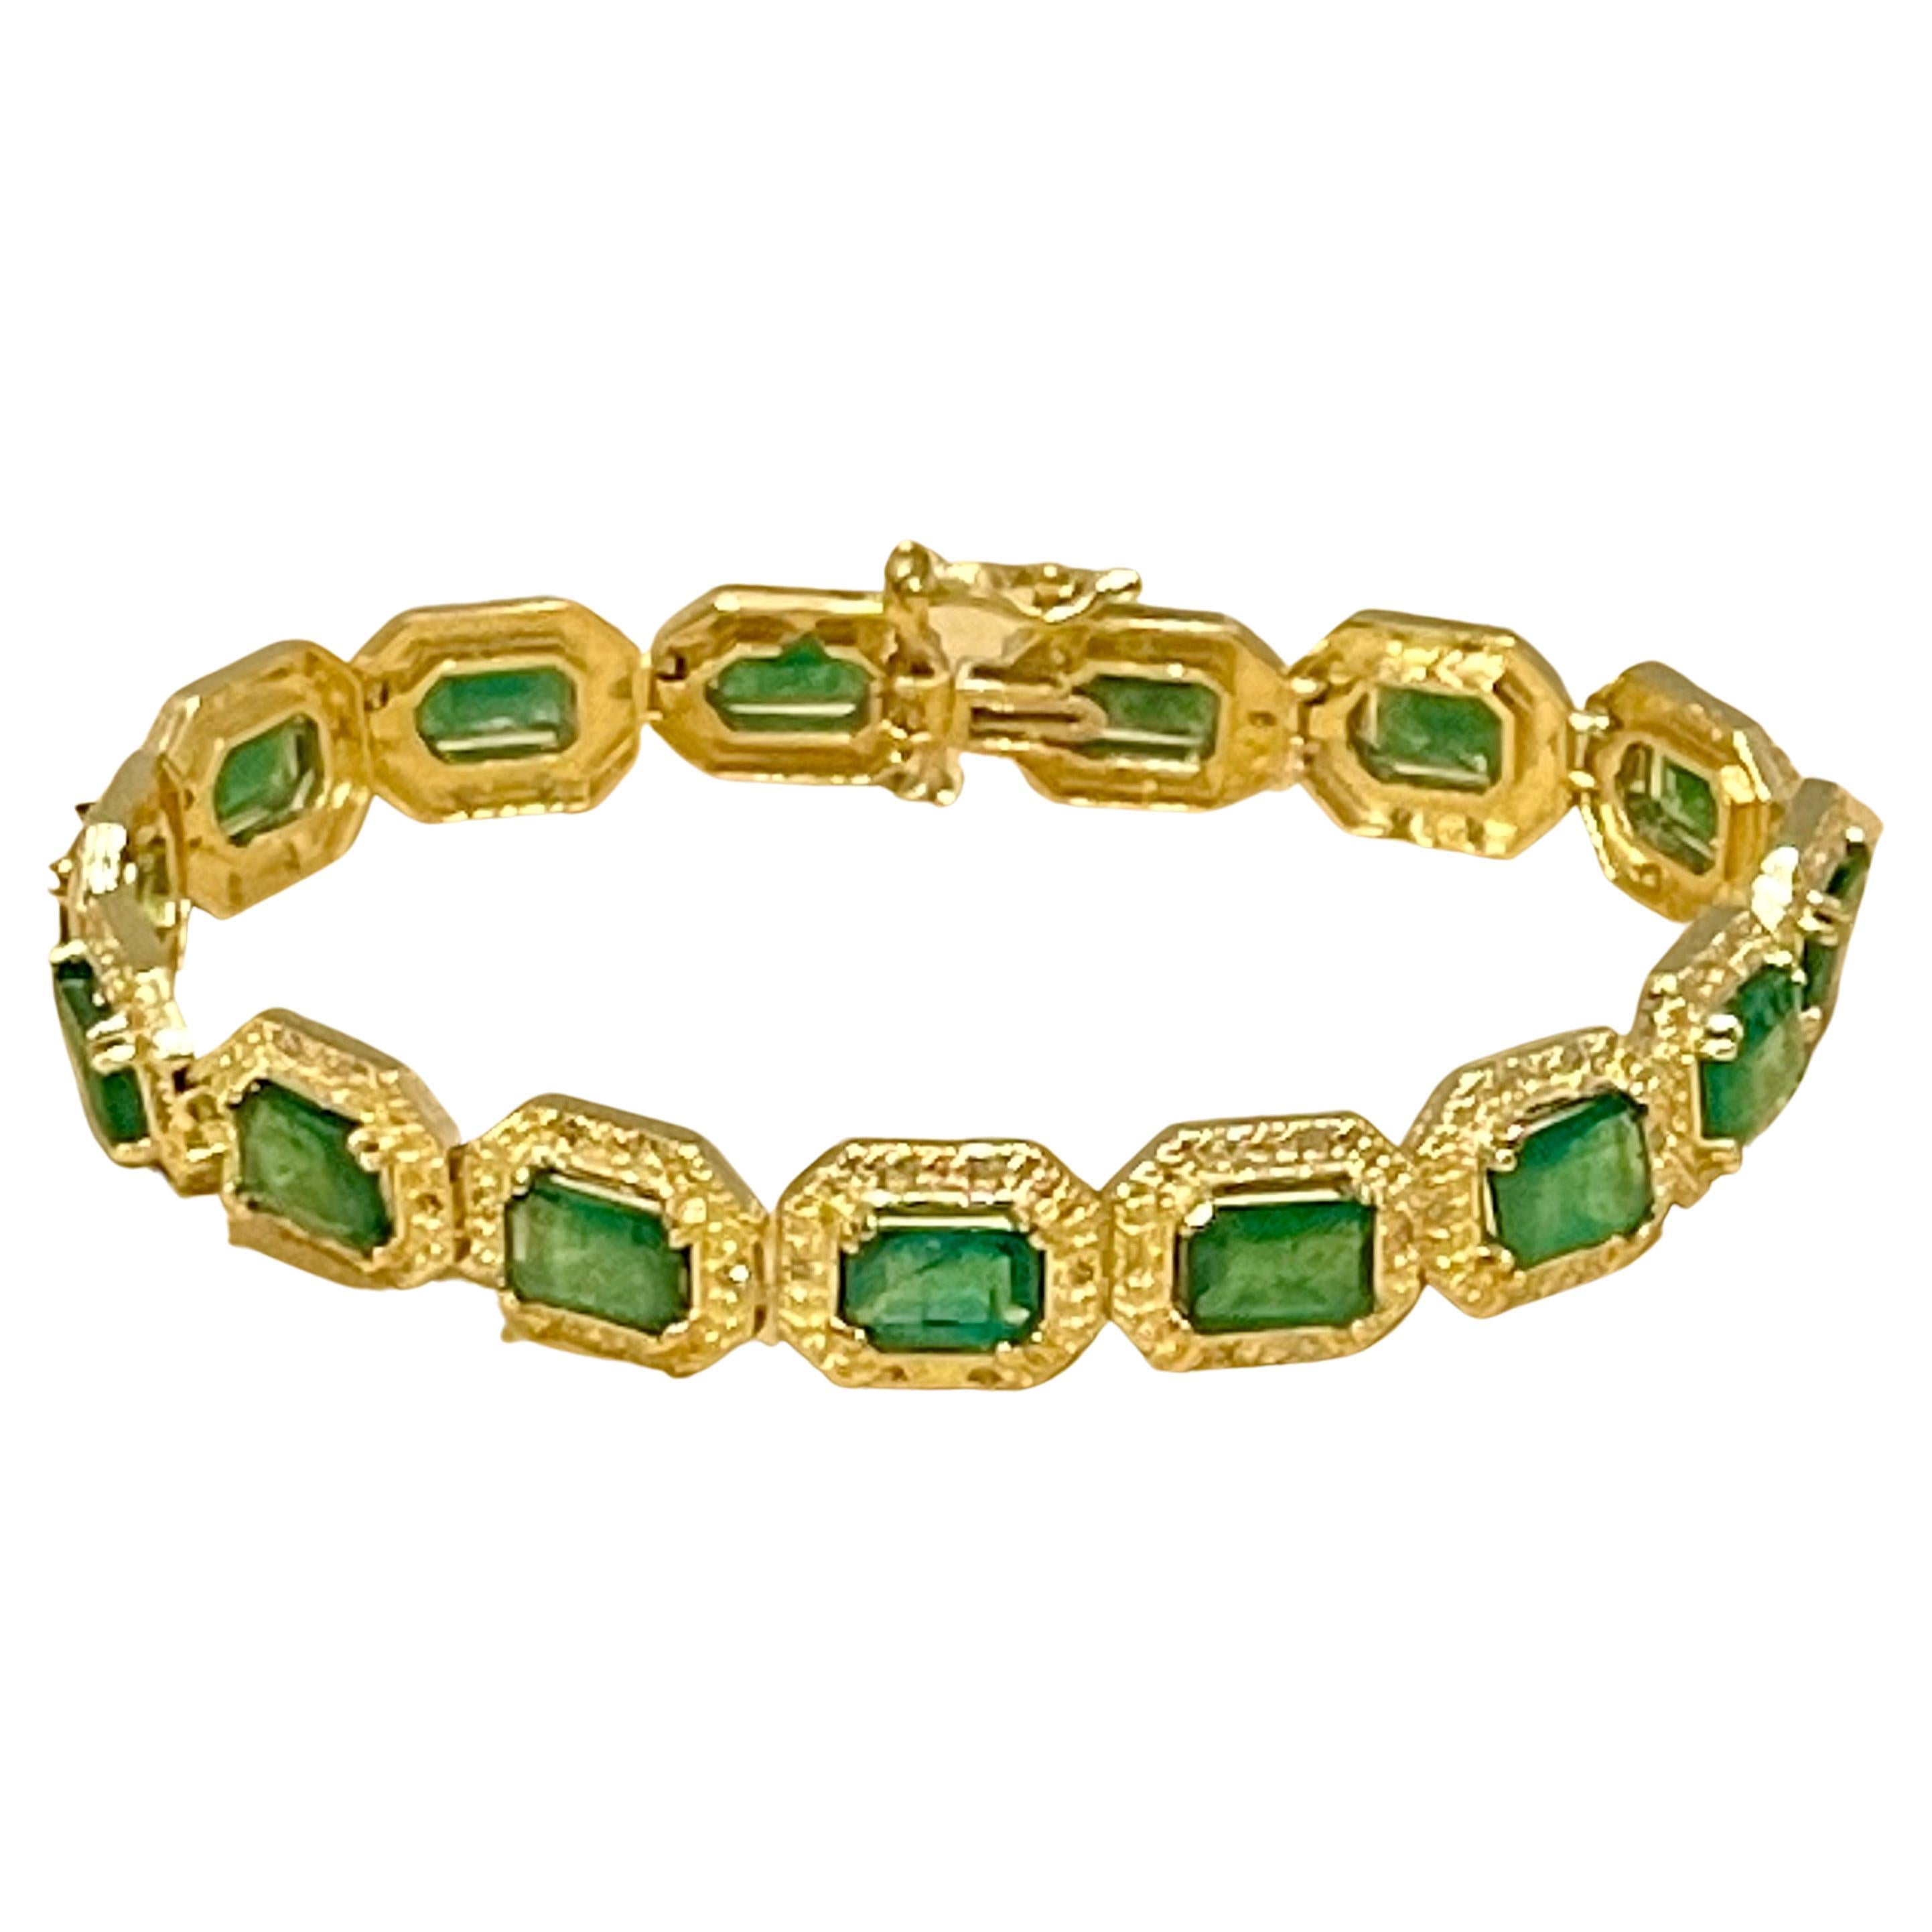 18 Carat Emerald Cut Emerald and Diamond Tennis Bracelet 14 Karat Yellow Gold In Excellent Condition For Sale In New York, NY